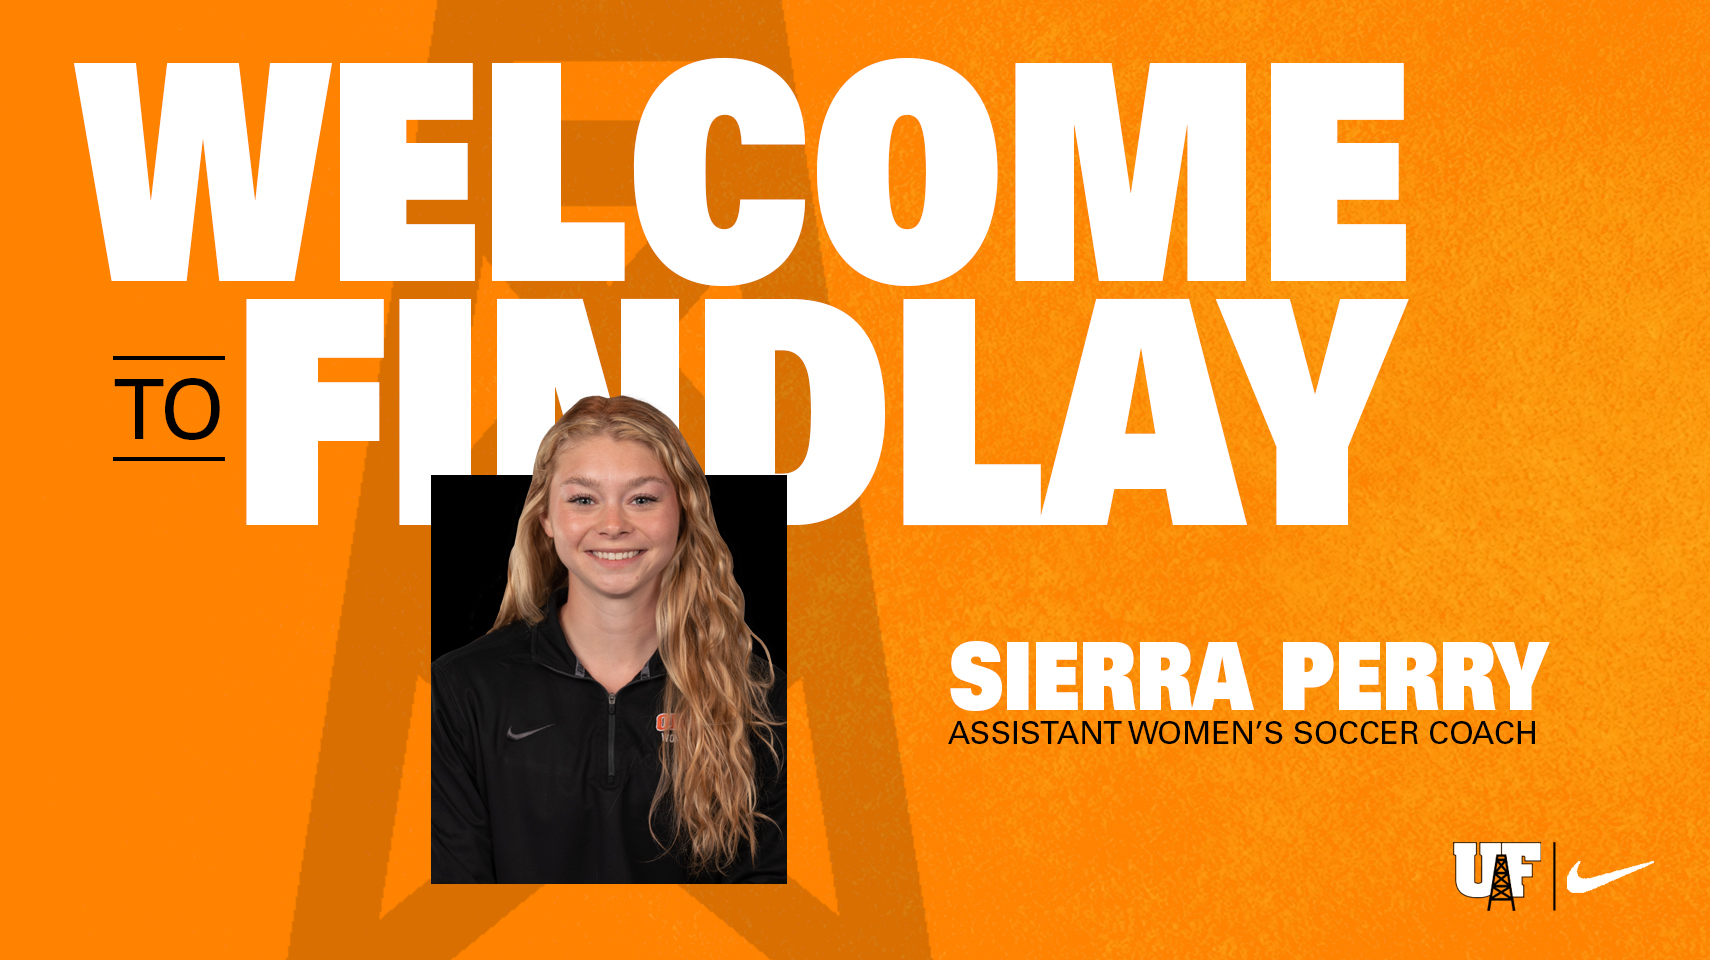 Sierra Perry hired as the Oilers new assistant women's soccer coach